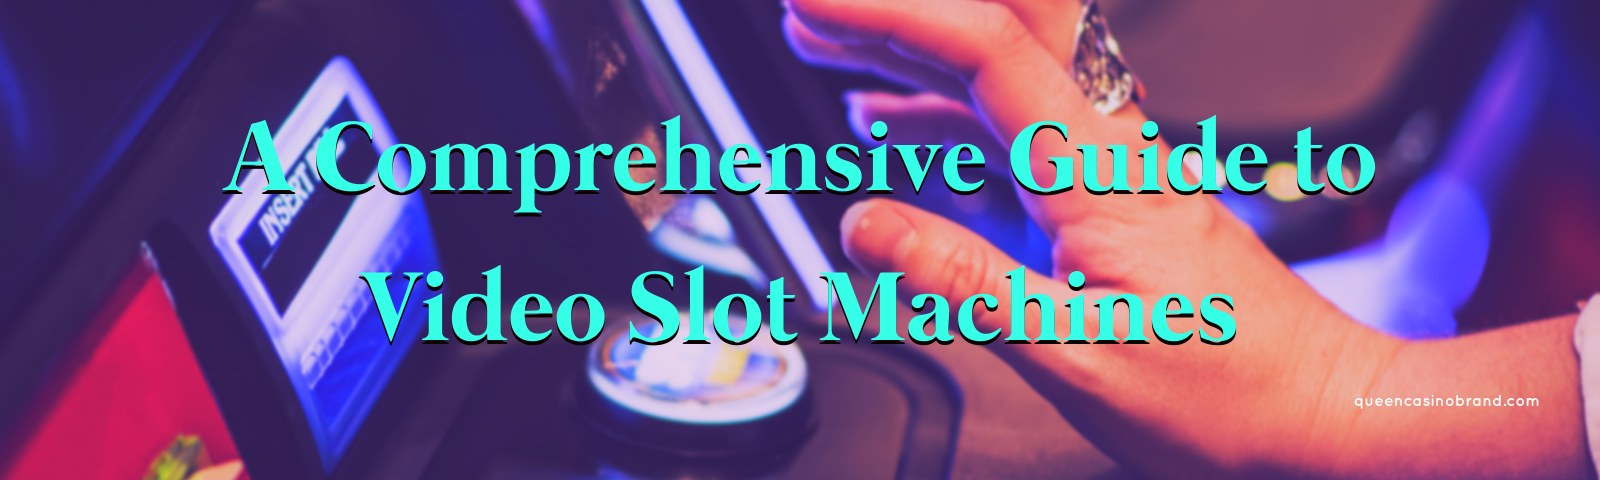 A Comprehensive Guide to Video Slot Machines